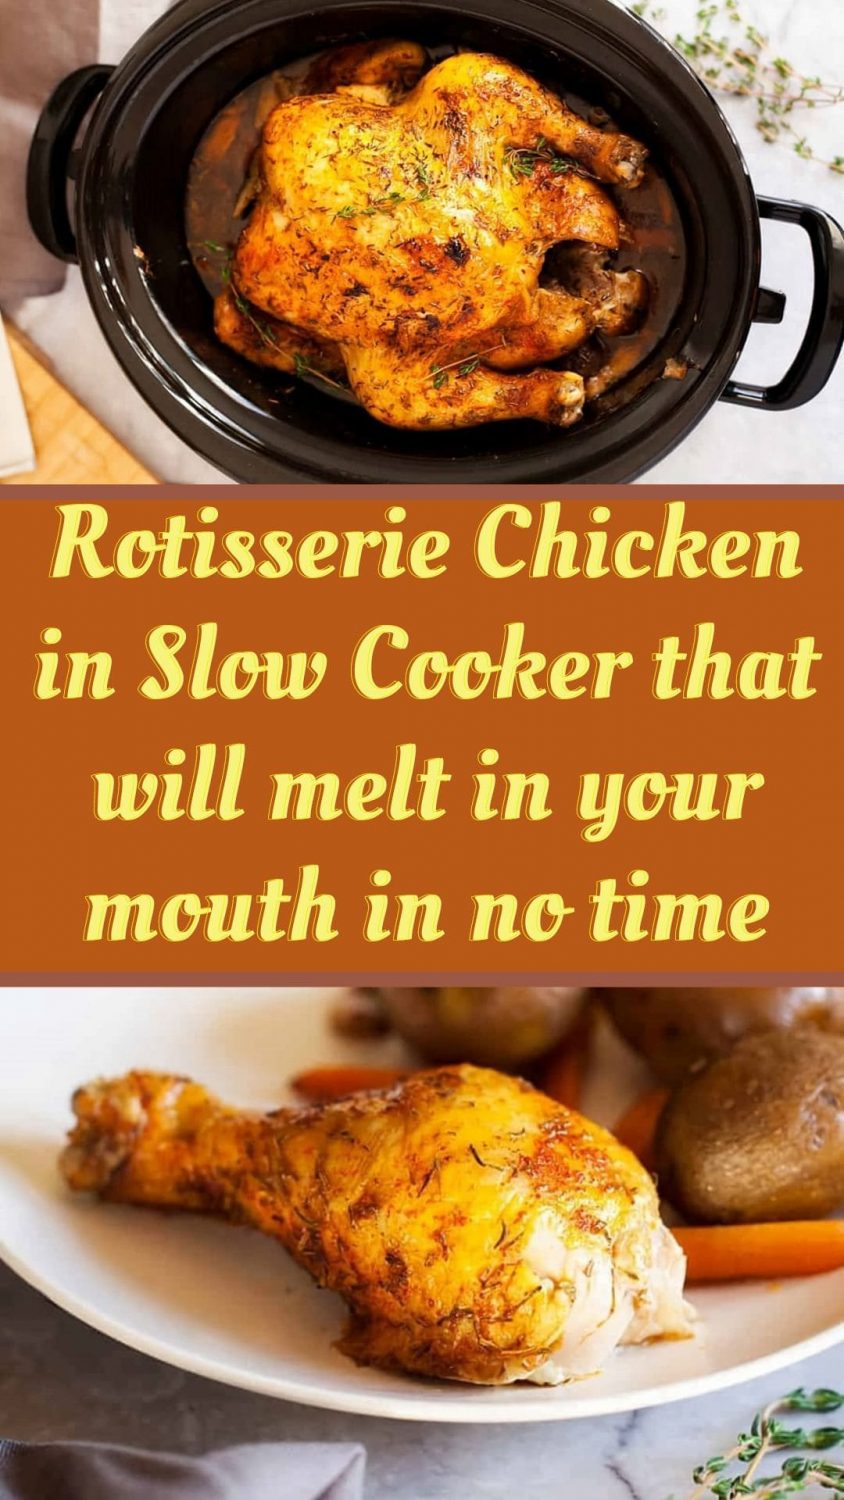 Rotisserie Chicken in Slow Cooker that will melt in your mouth in no time